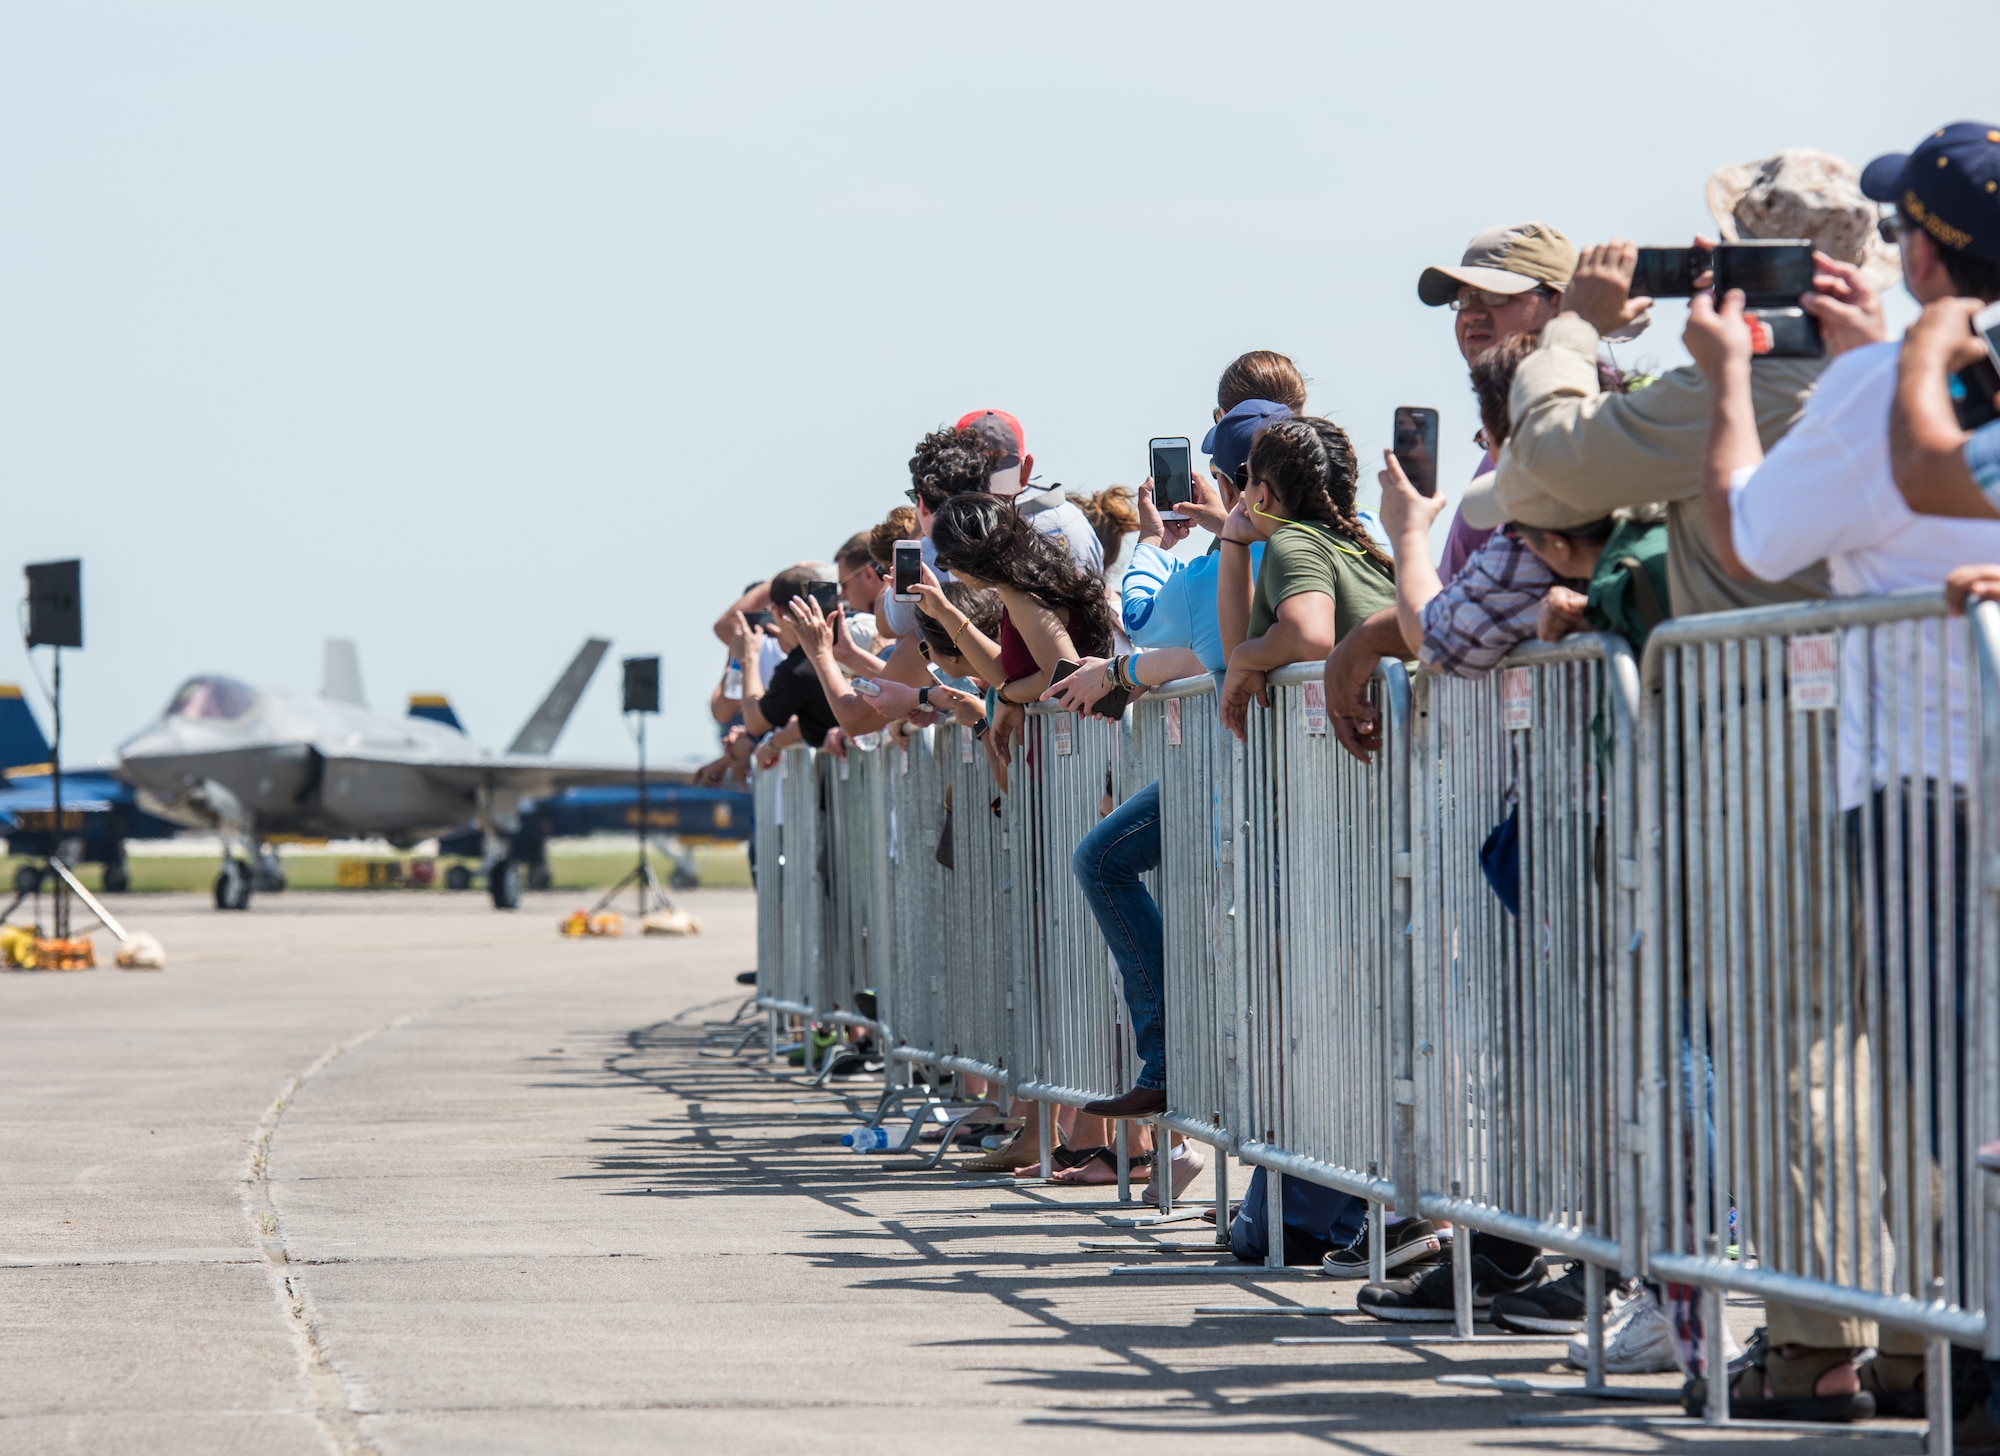 A crowd of air show guests watch as the F-35 Lightning II taxis down the runway during the Wings Over South Texas air show at Naval Air Station, Texas, March 25, 2018. During the two-day event, approximately 100,000 guests from all across the United States attended the WOST air show. (U.S. Air Force photo by Airman 1st Class Alexander Cook)